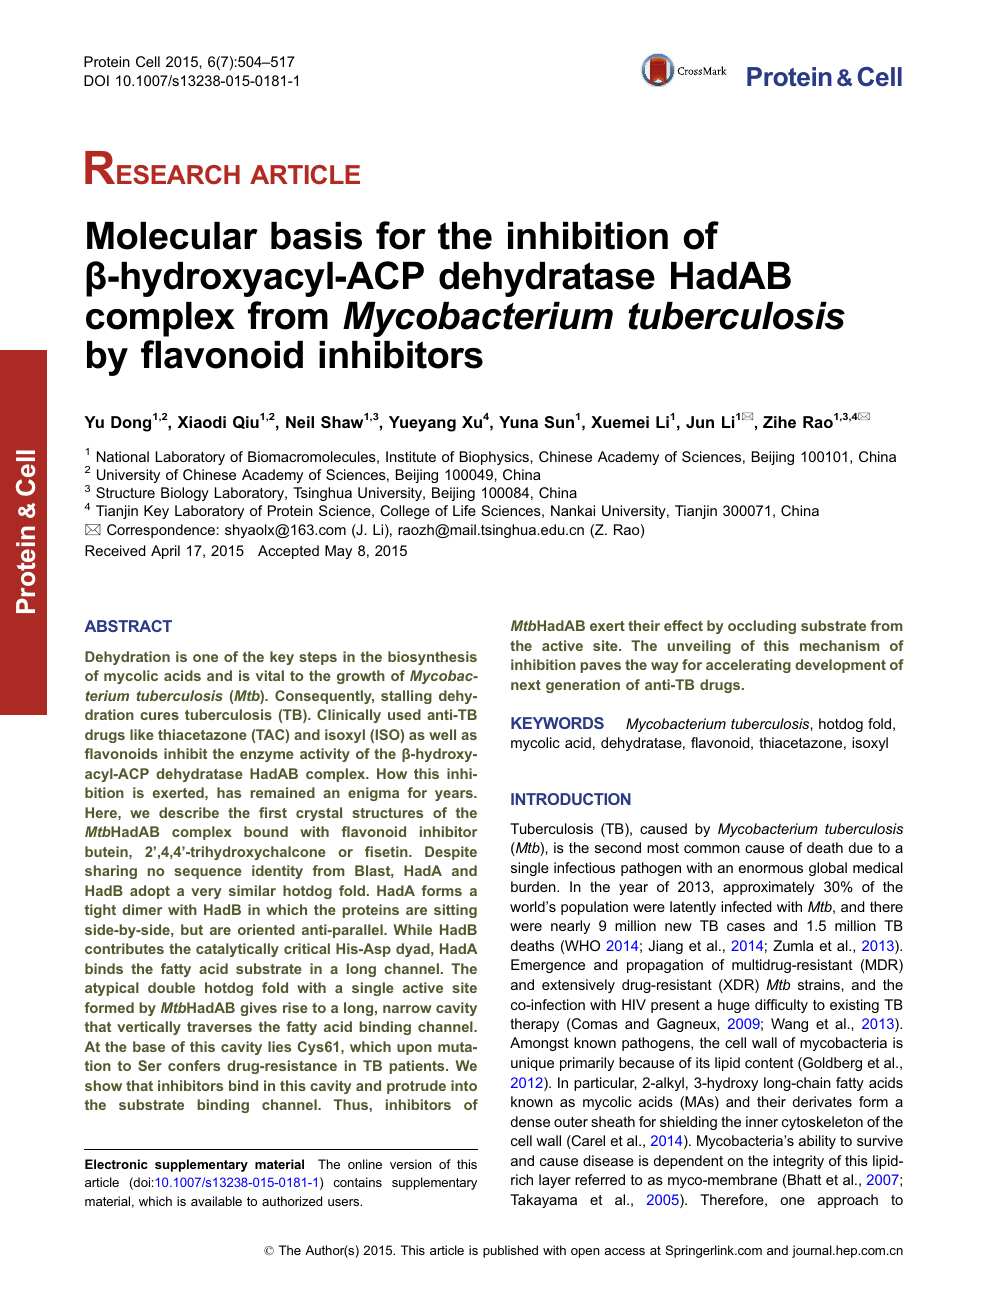 Molecular Basis For The Inhibition Of B Hydroxyacyl Acp Dehydratase Hadab Complex From Mycobacterium Tuberculosis By Flavonoid Inhibitors Topic Of Research Paper In Biological Sciences Download Scholarly Article Pdf And Read For Free